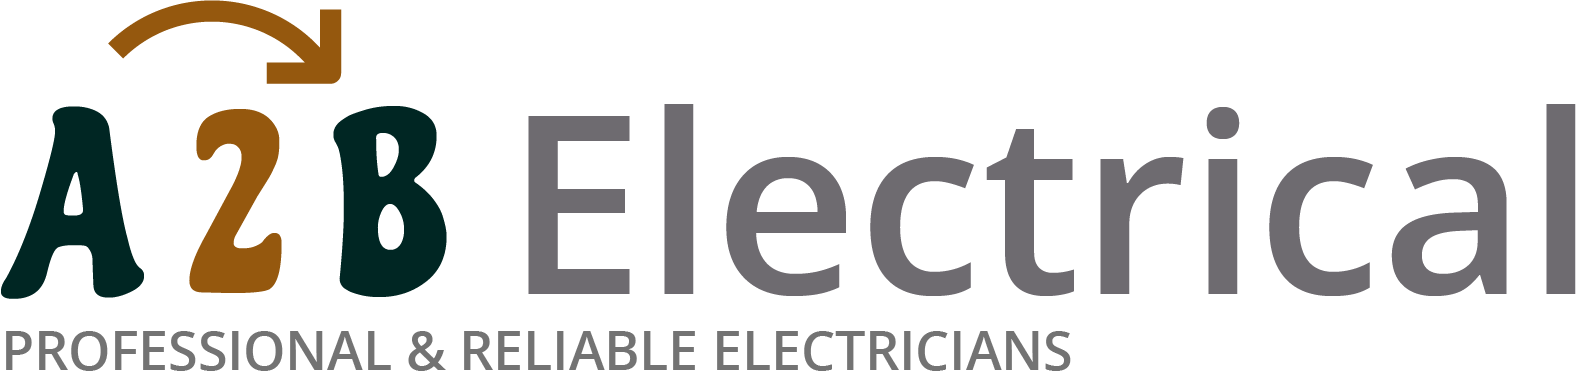 If you have electrical wiring problems in Hatfield, we can provide an electrician to have a look for you. 